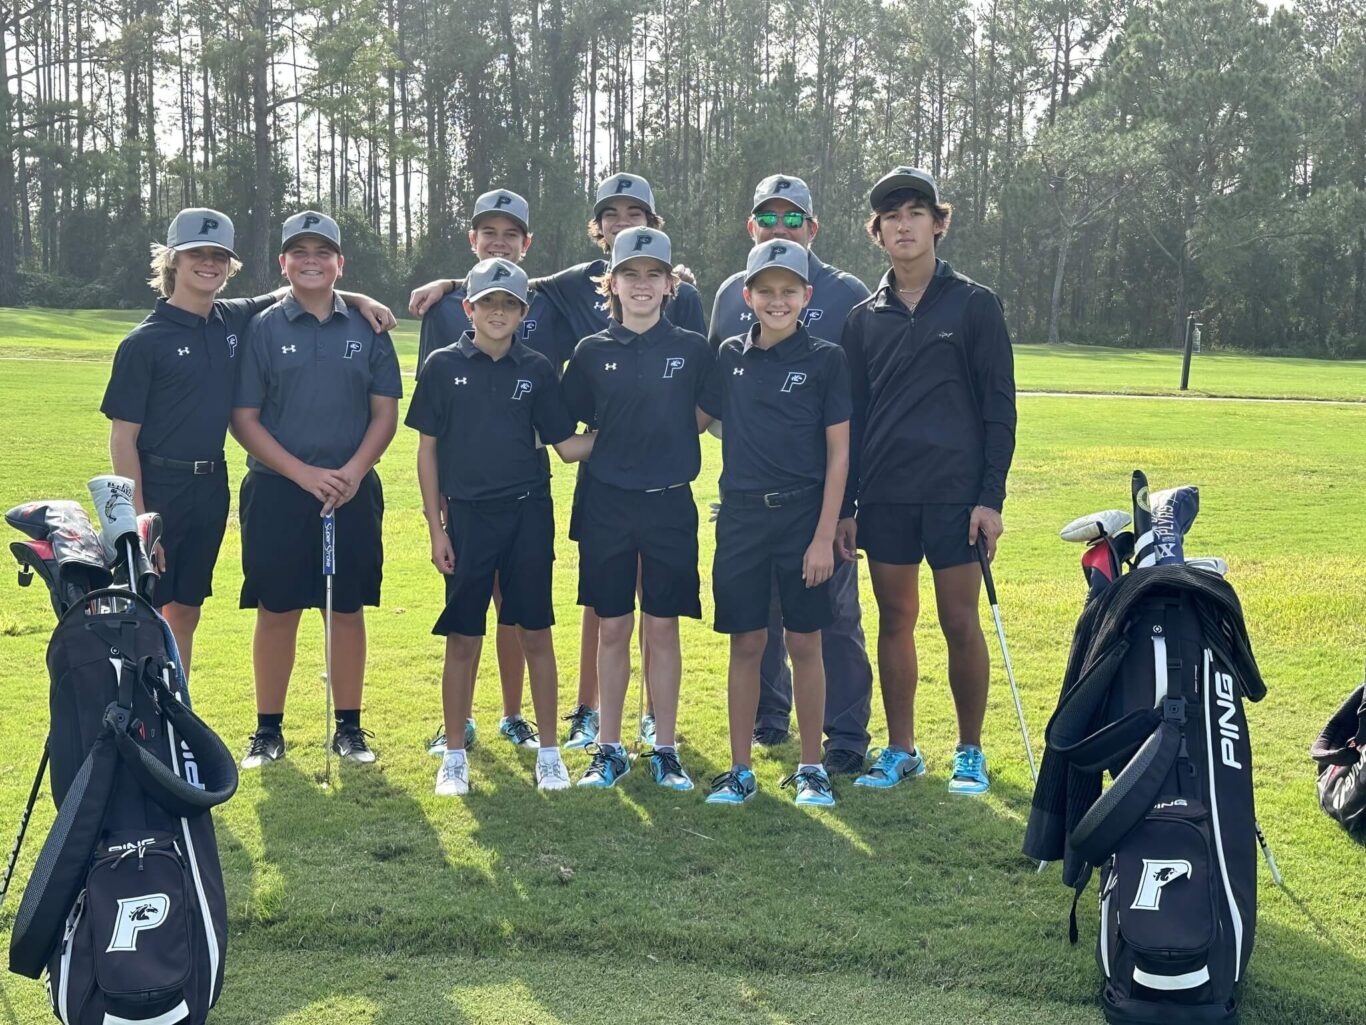 A group of boys posing for a golf picture.